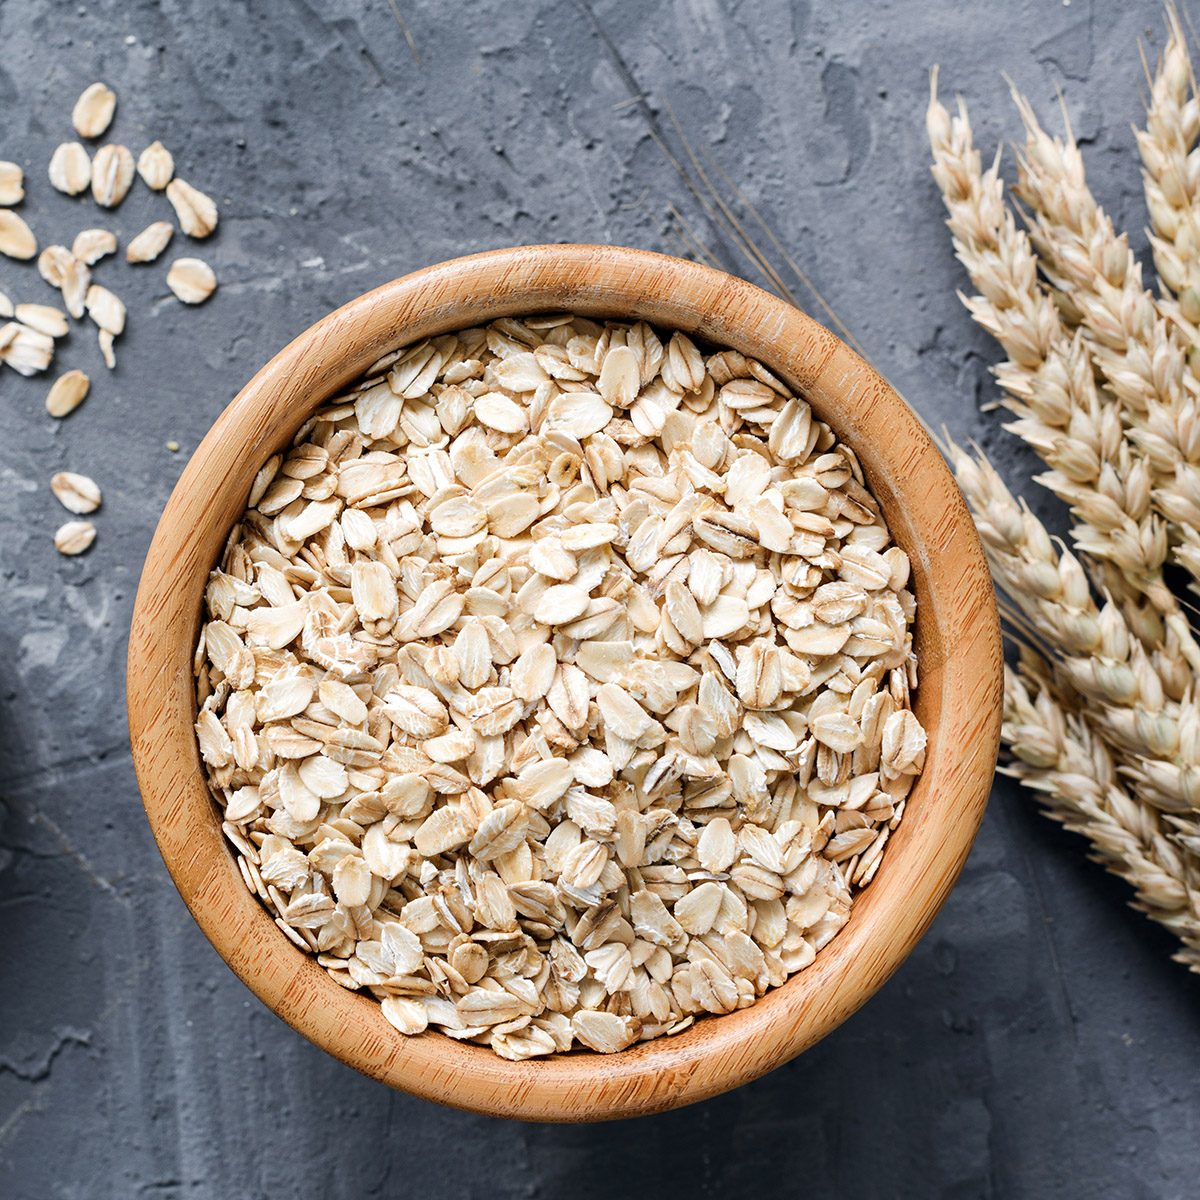 Oats or rounded oats in a corner in a wooden bowl and stone background.